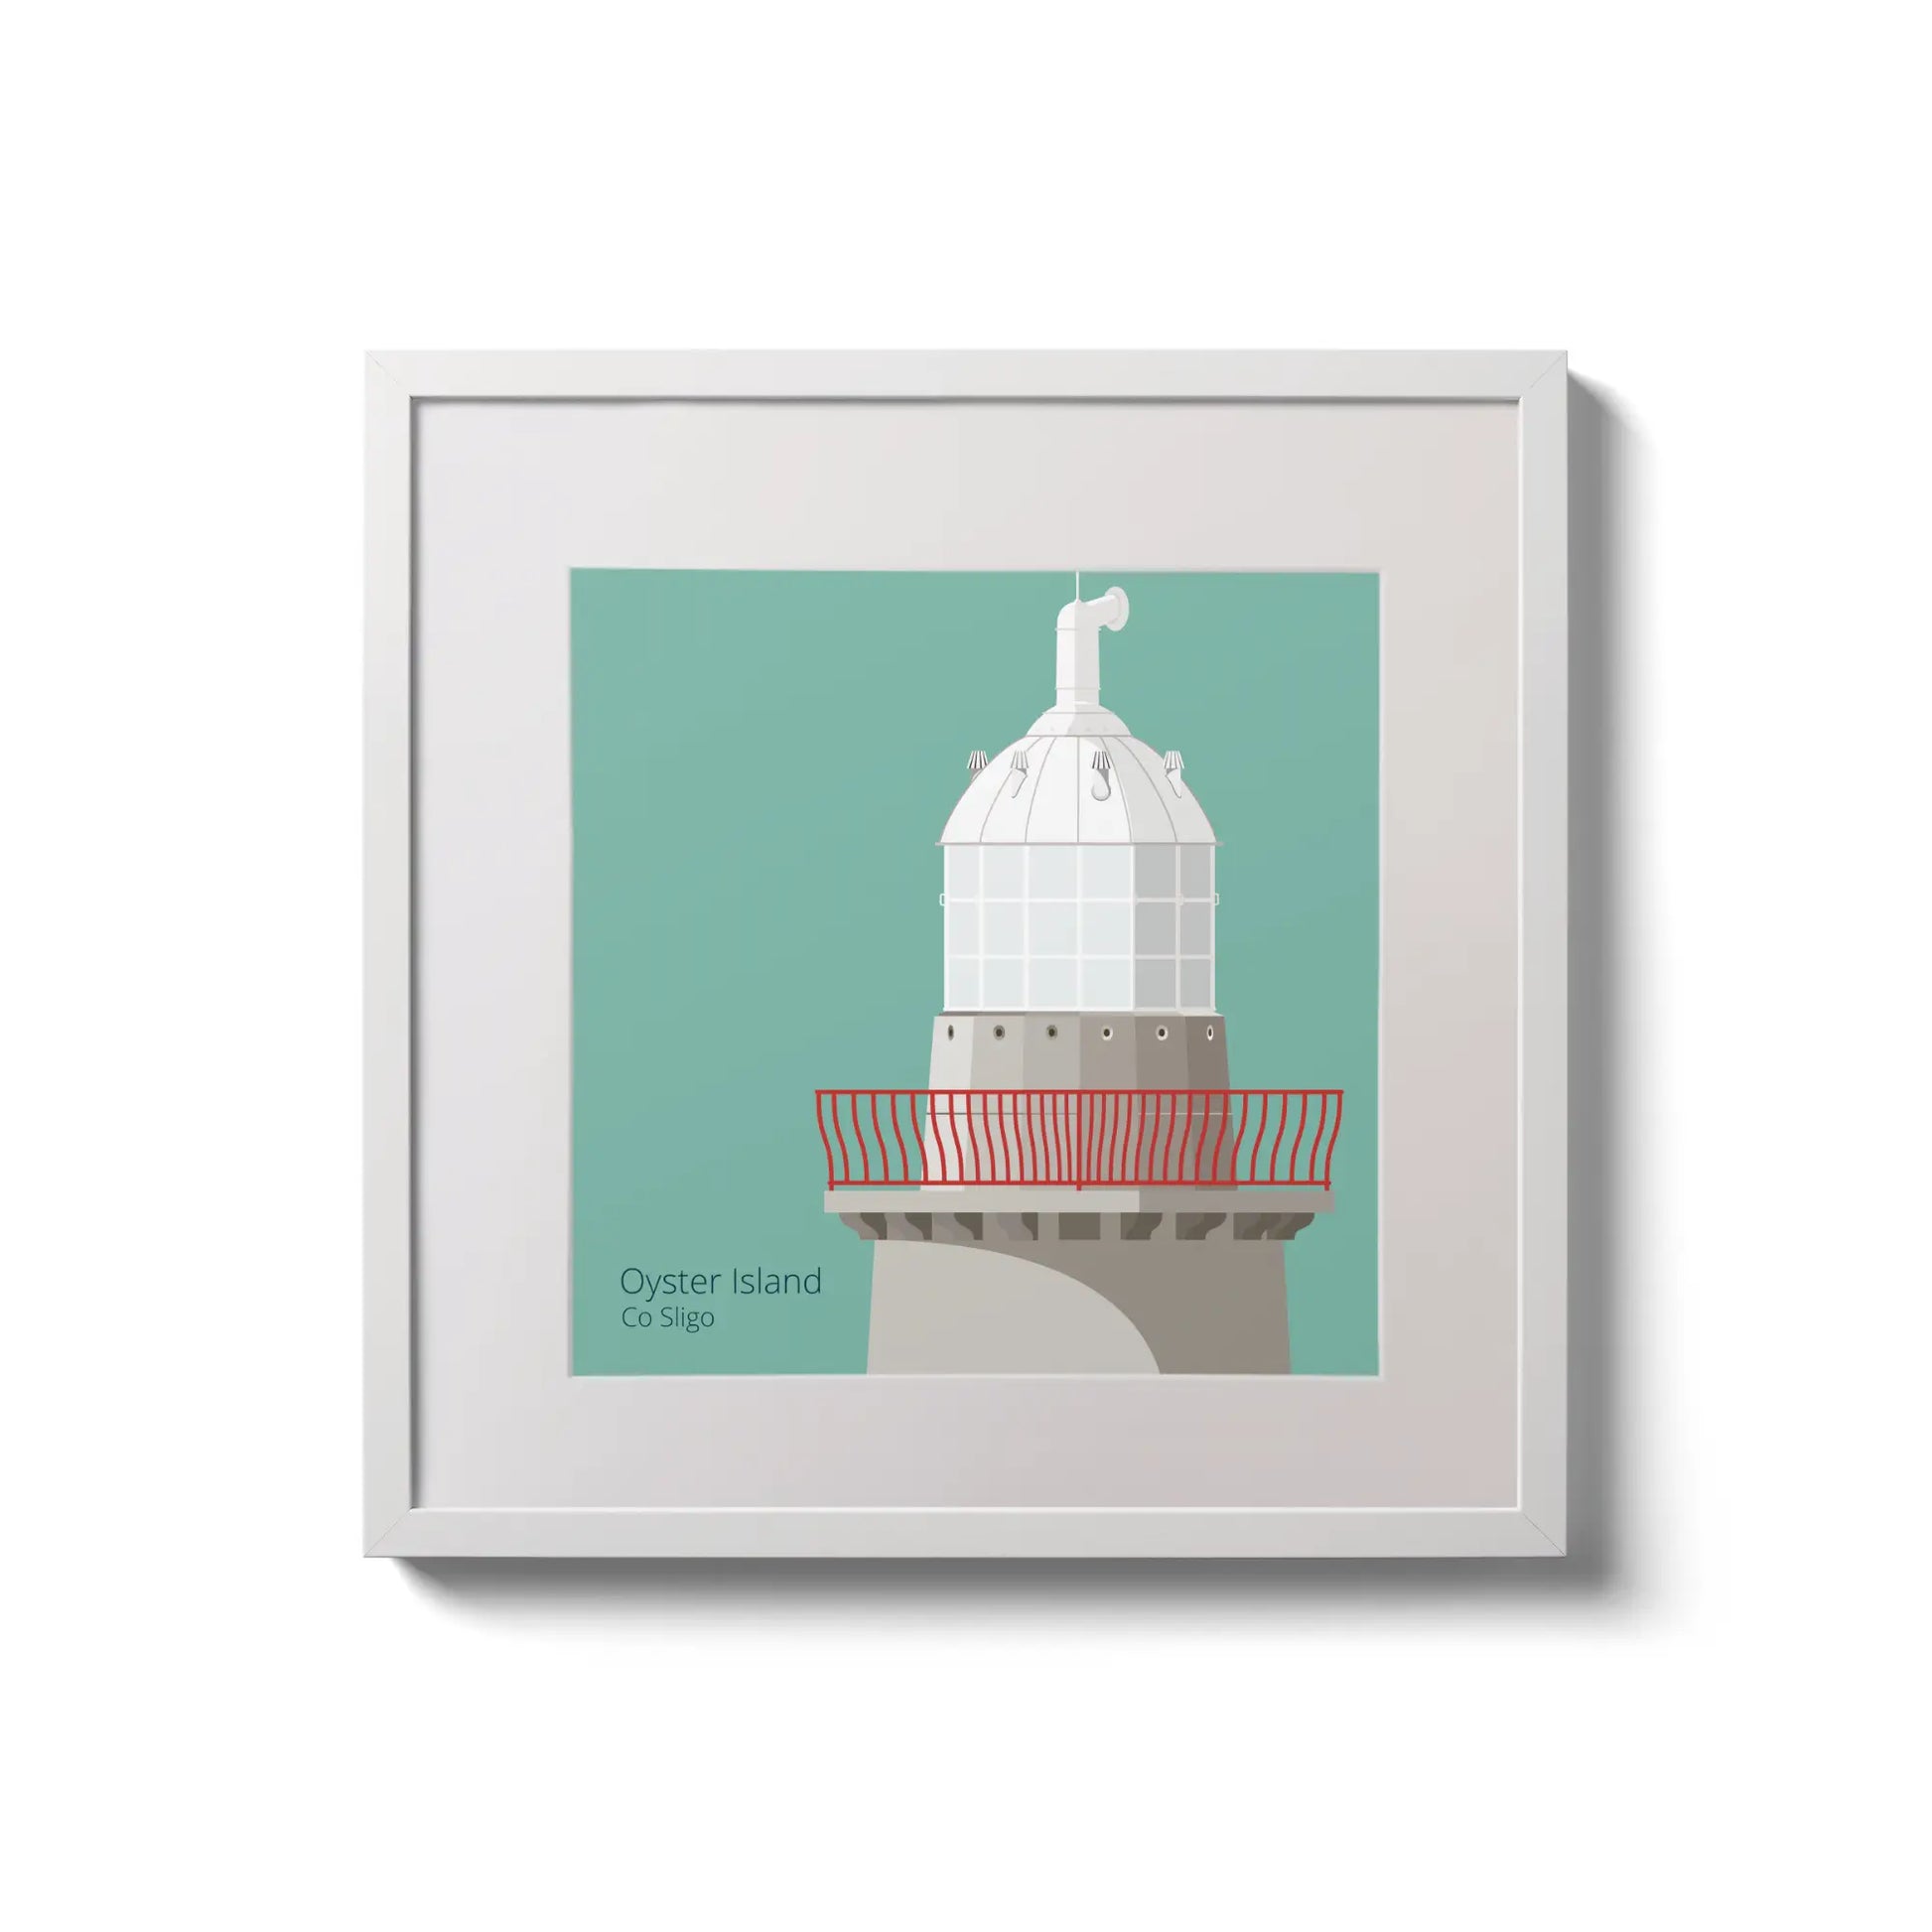 Illustration of Oyster Island lighthouse on an ocean green background,  in a white square frame measuring 20x20cm.